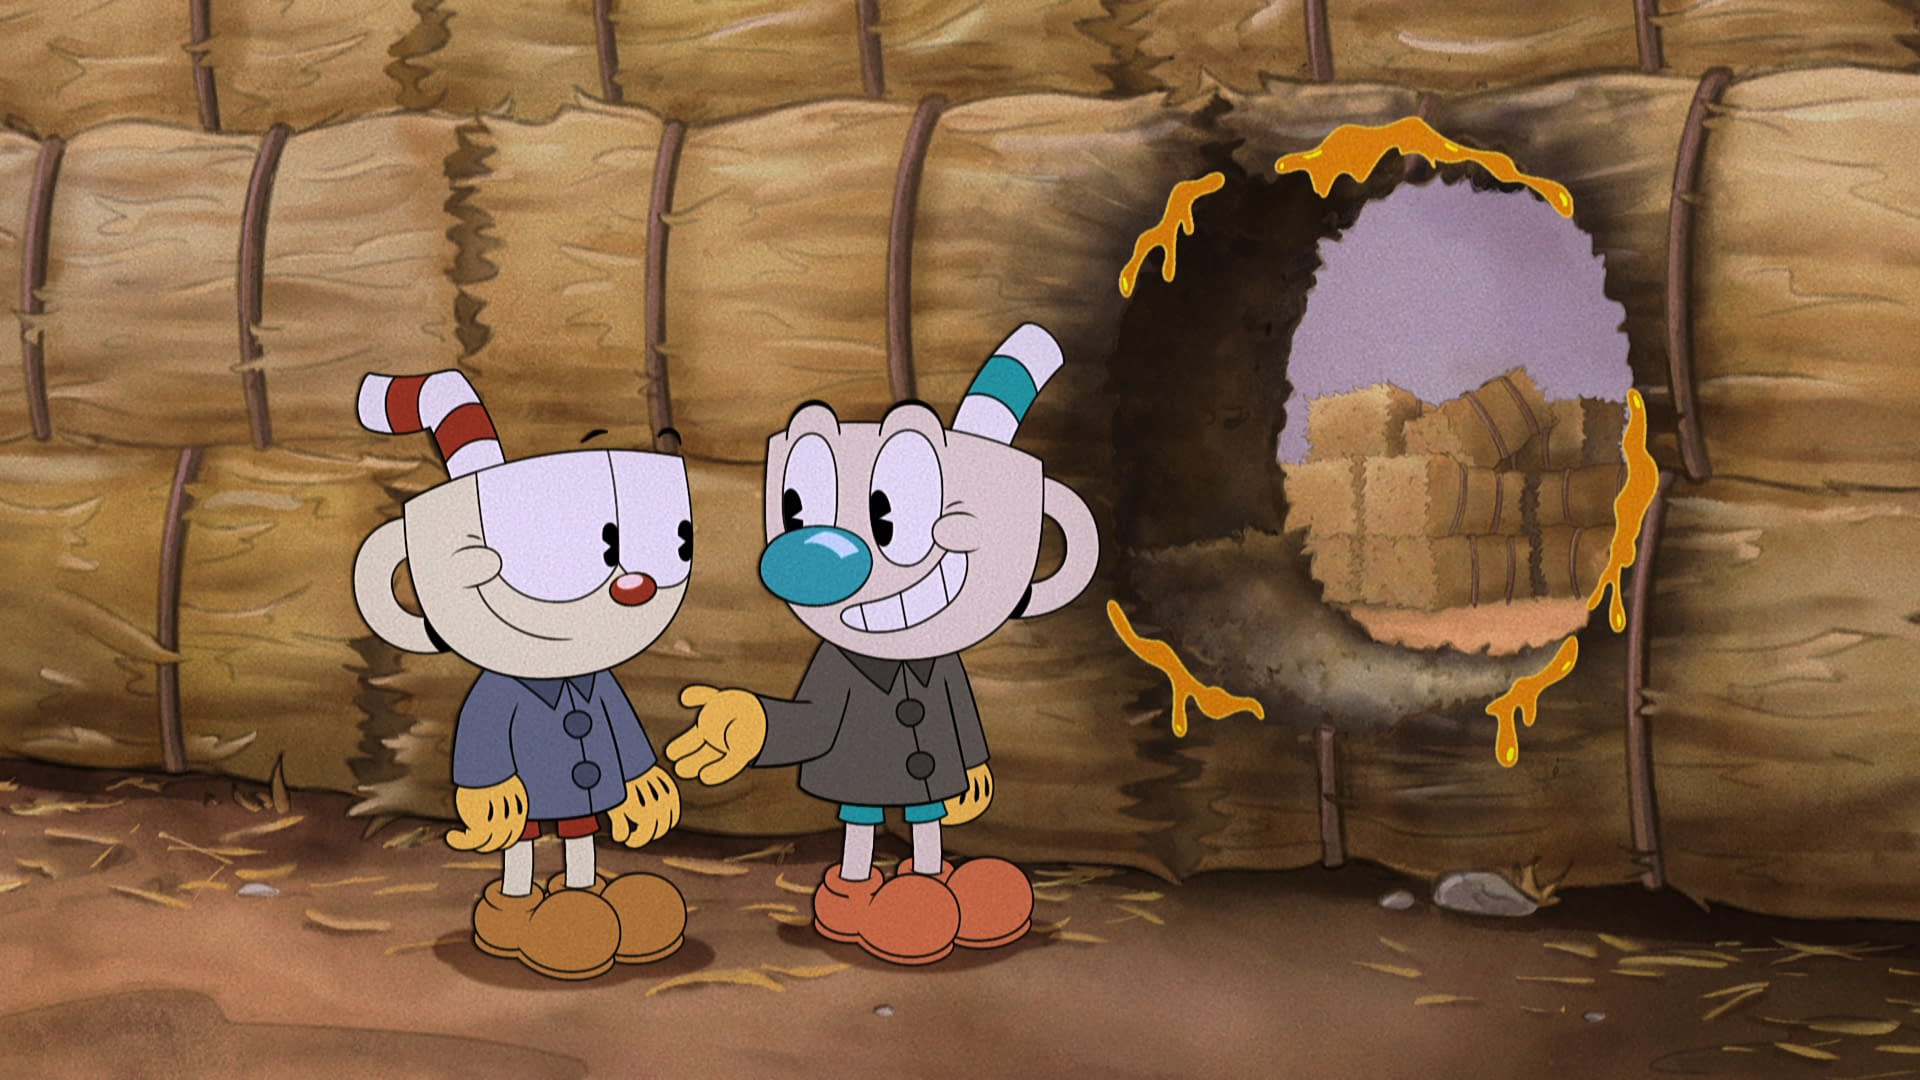 The Cuphead Show BBQ 2-Pack – The Cuphead Show : Officially